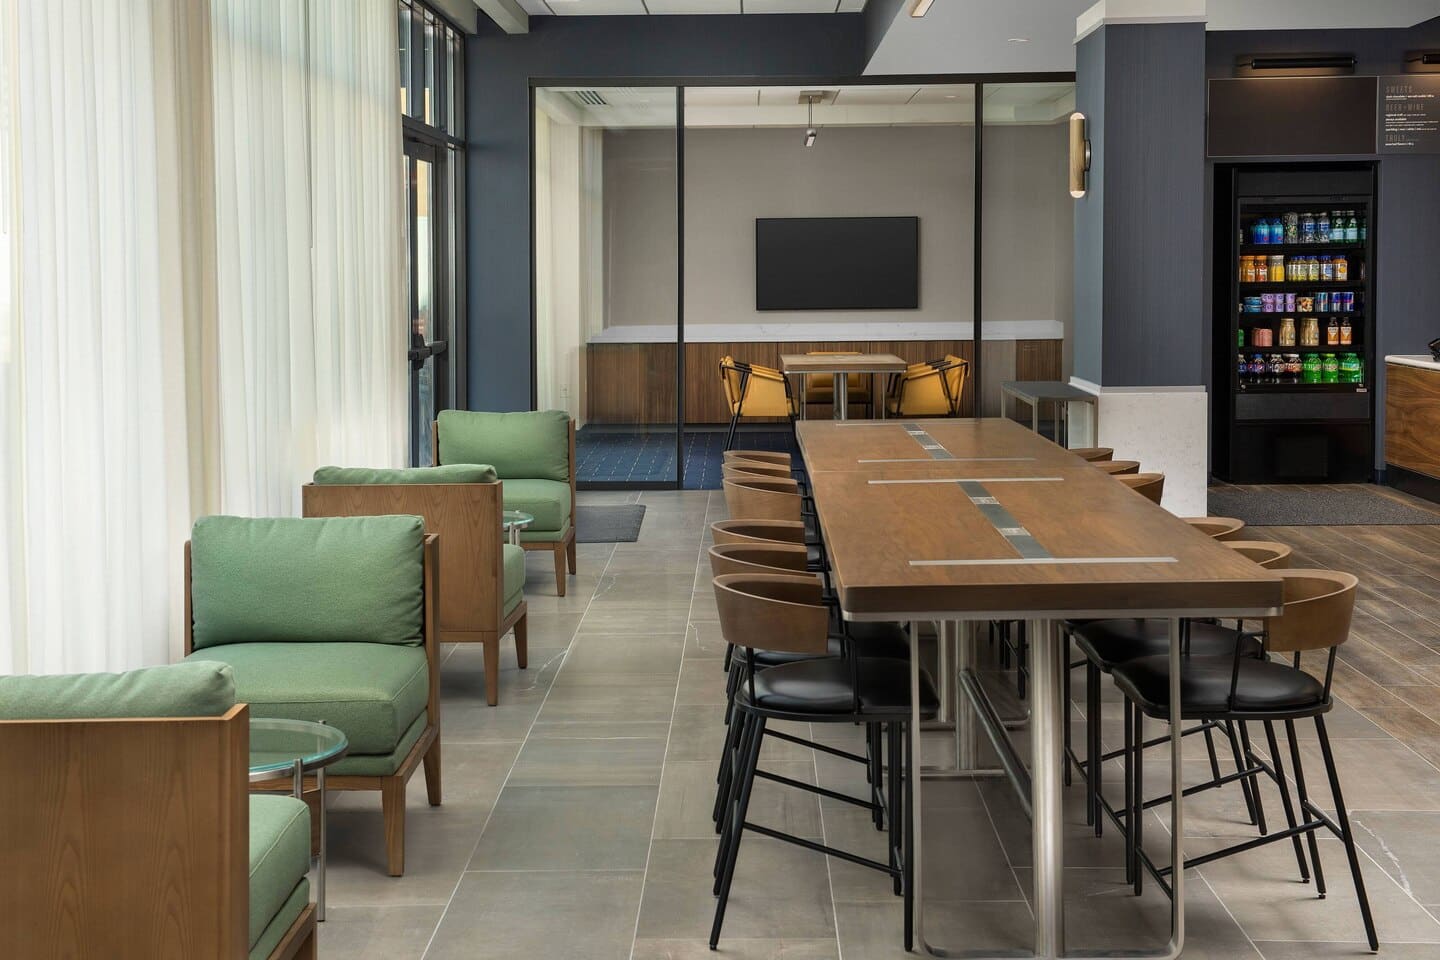 Courtyard by Marriott Perry Crossing Communal Table